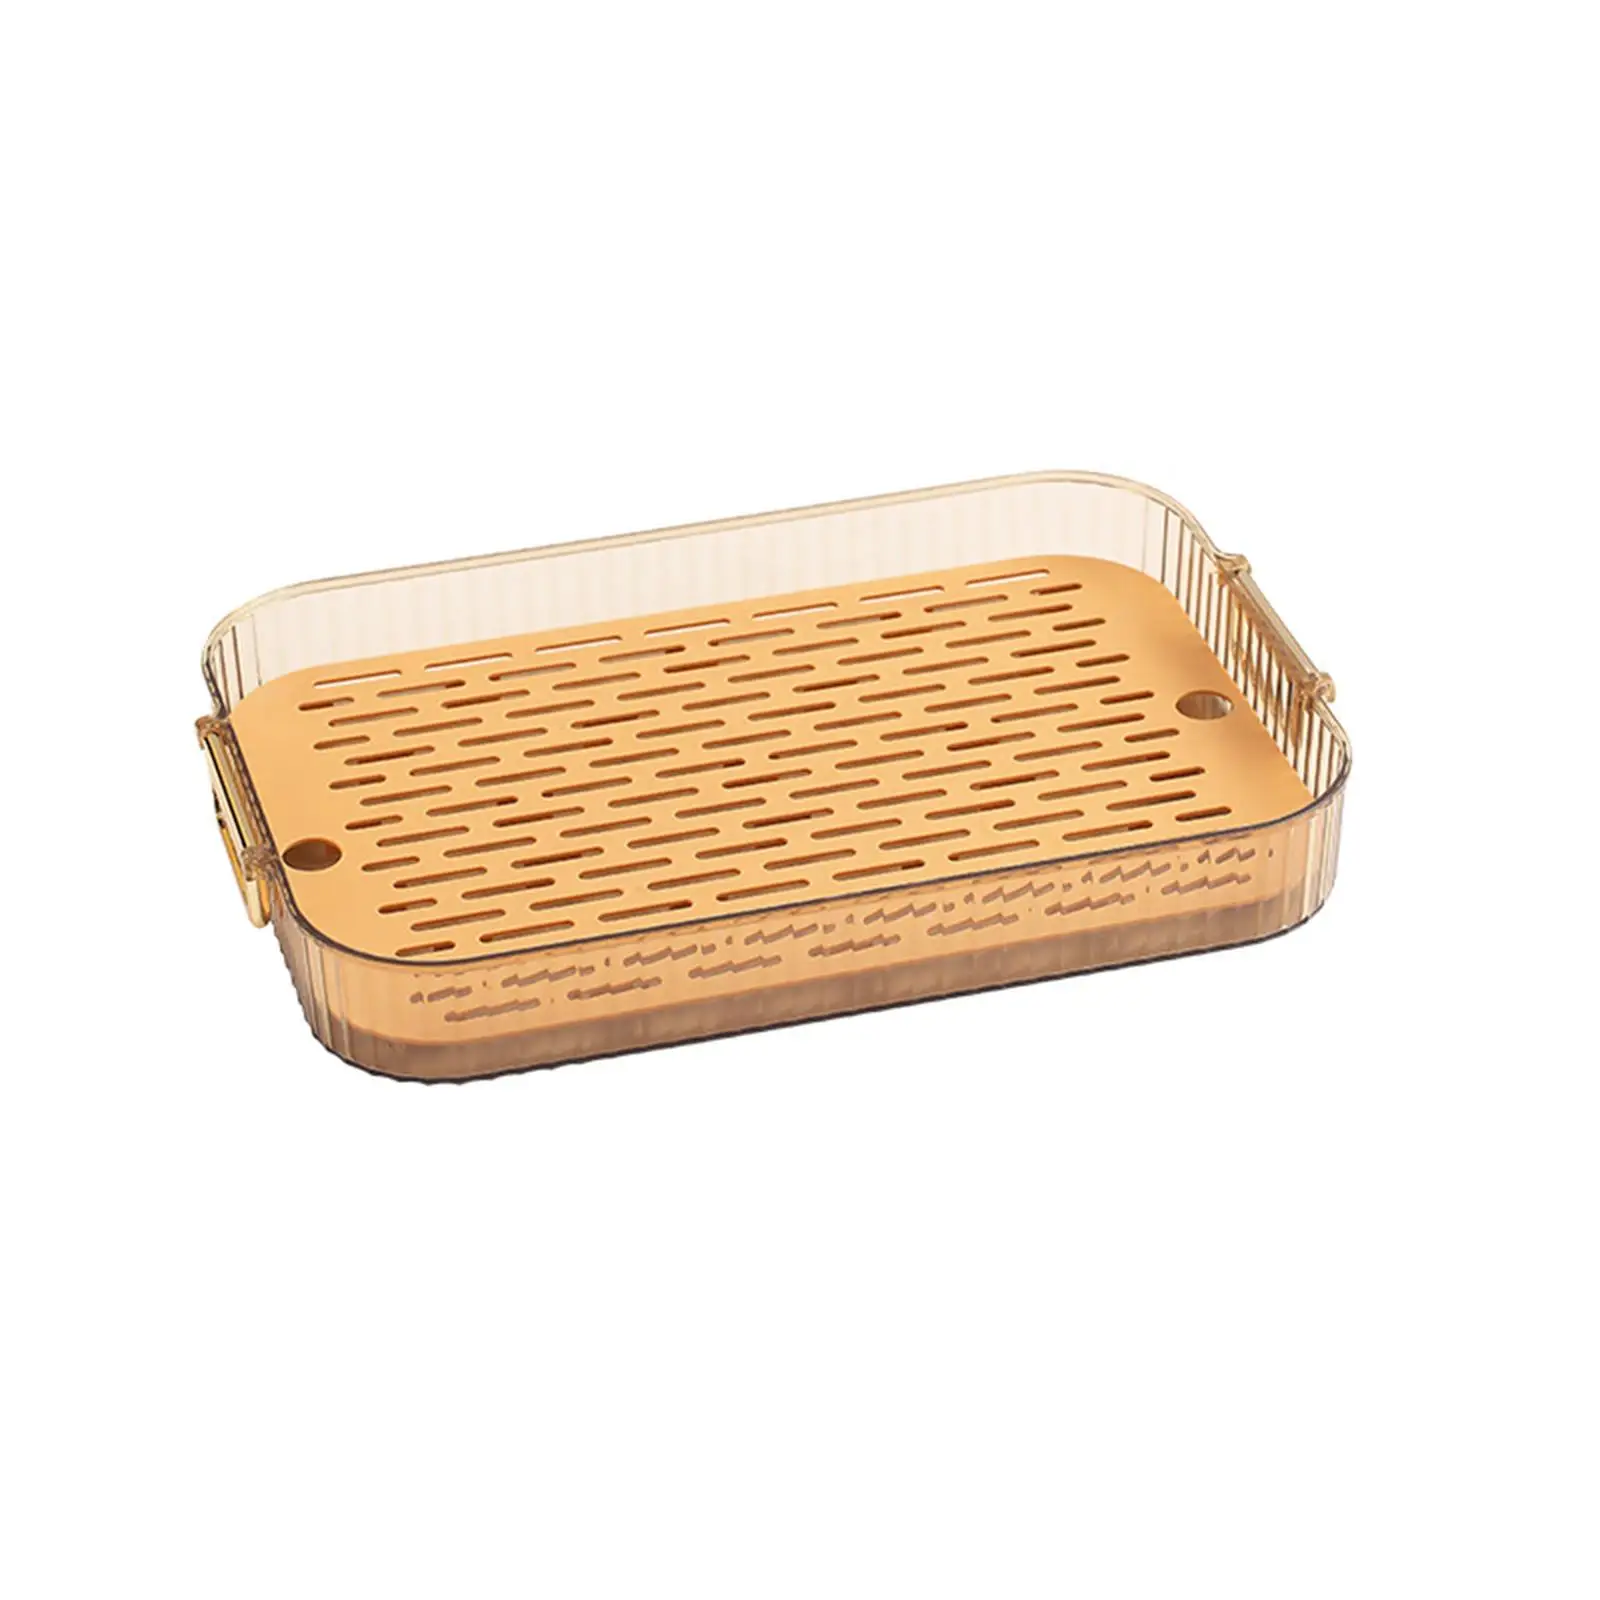 Serving Tray Drainer Tray Breakfast Tray Tableware Water Cup Drainer Storage Box Tray Tea Trays for Bathroom Table Centerpiece